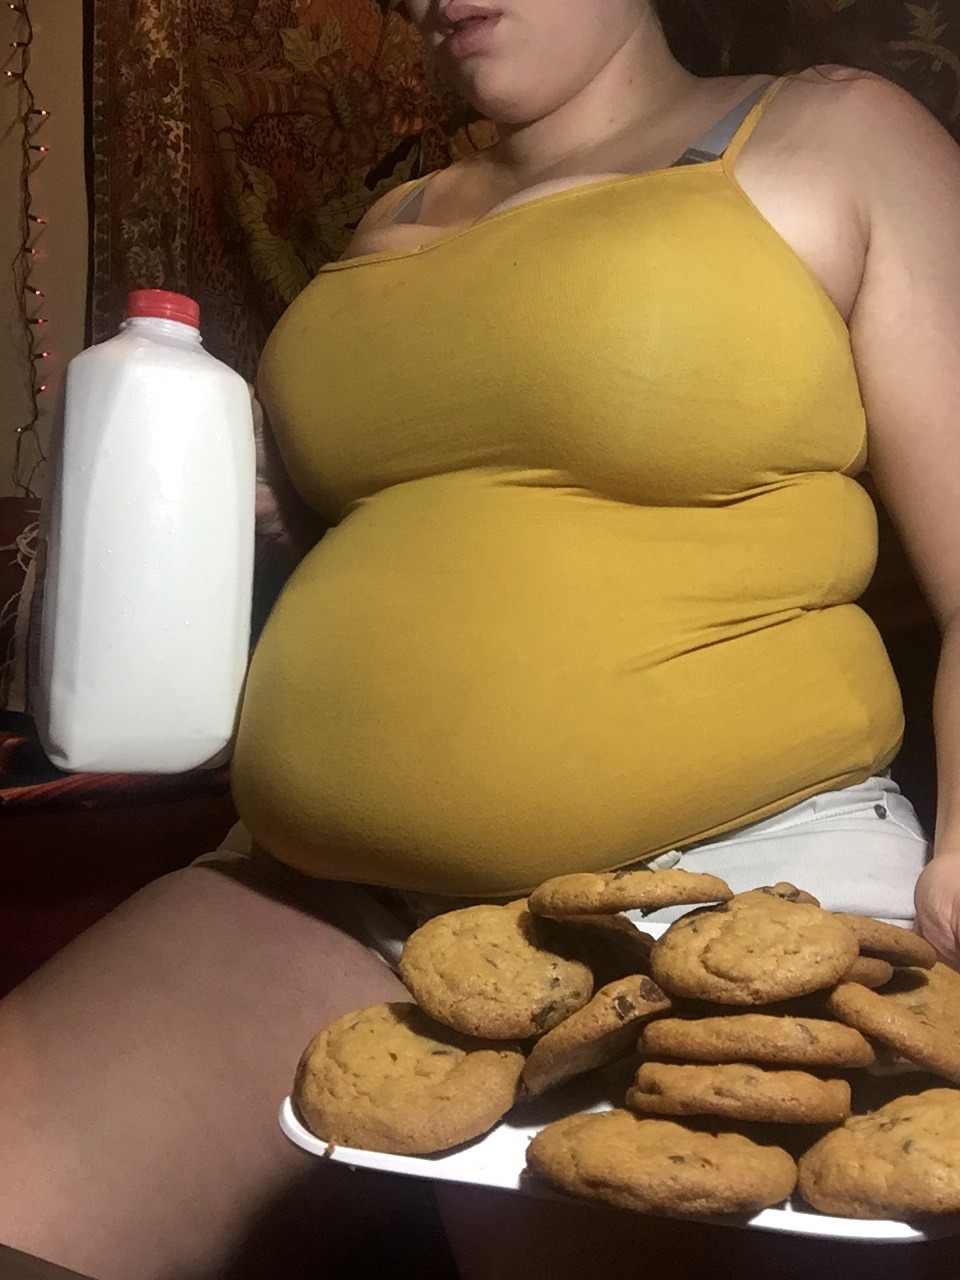 sb131:  Cookies and milk before bed time. (3160 calorie midnight snack nbd)